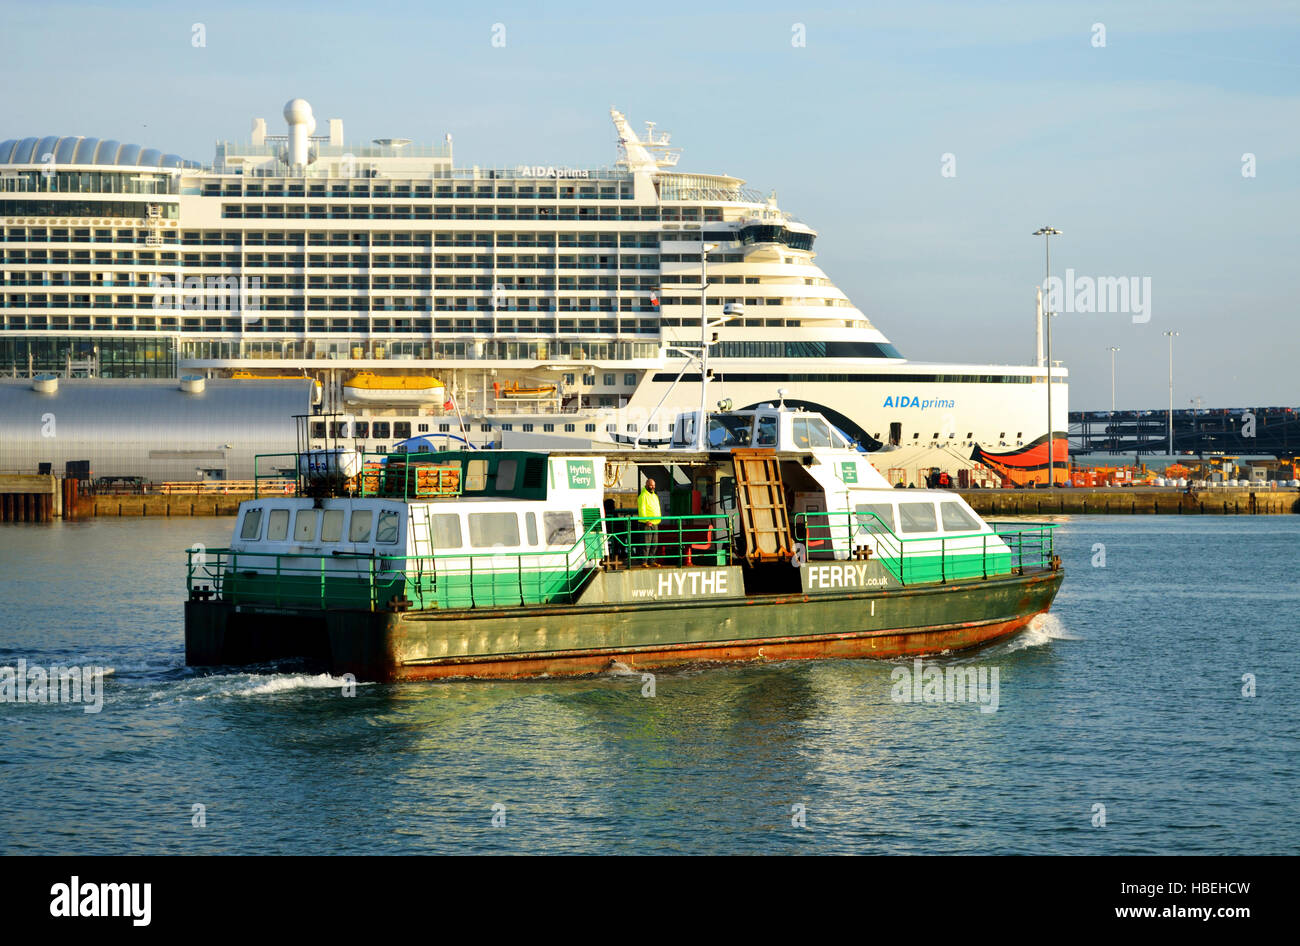 Hythe Ferry leaving Town Quay in Southampton with cruise ship AIDA prima in the background Stock Photo